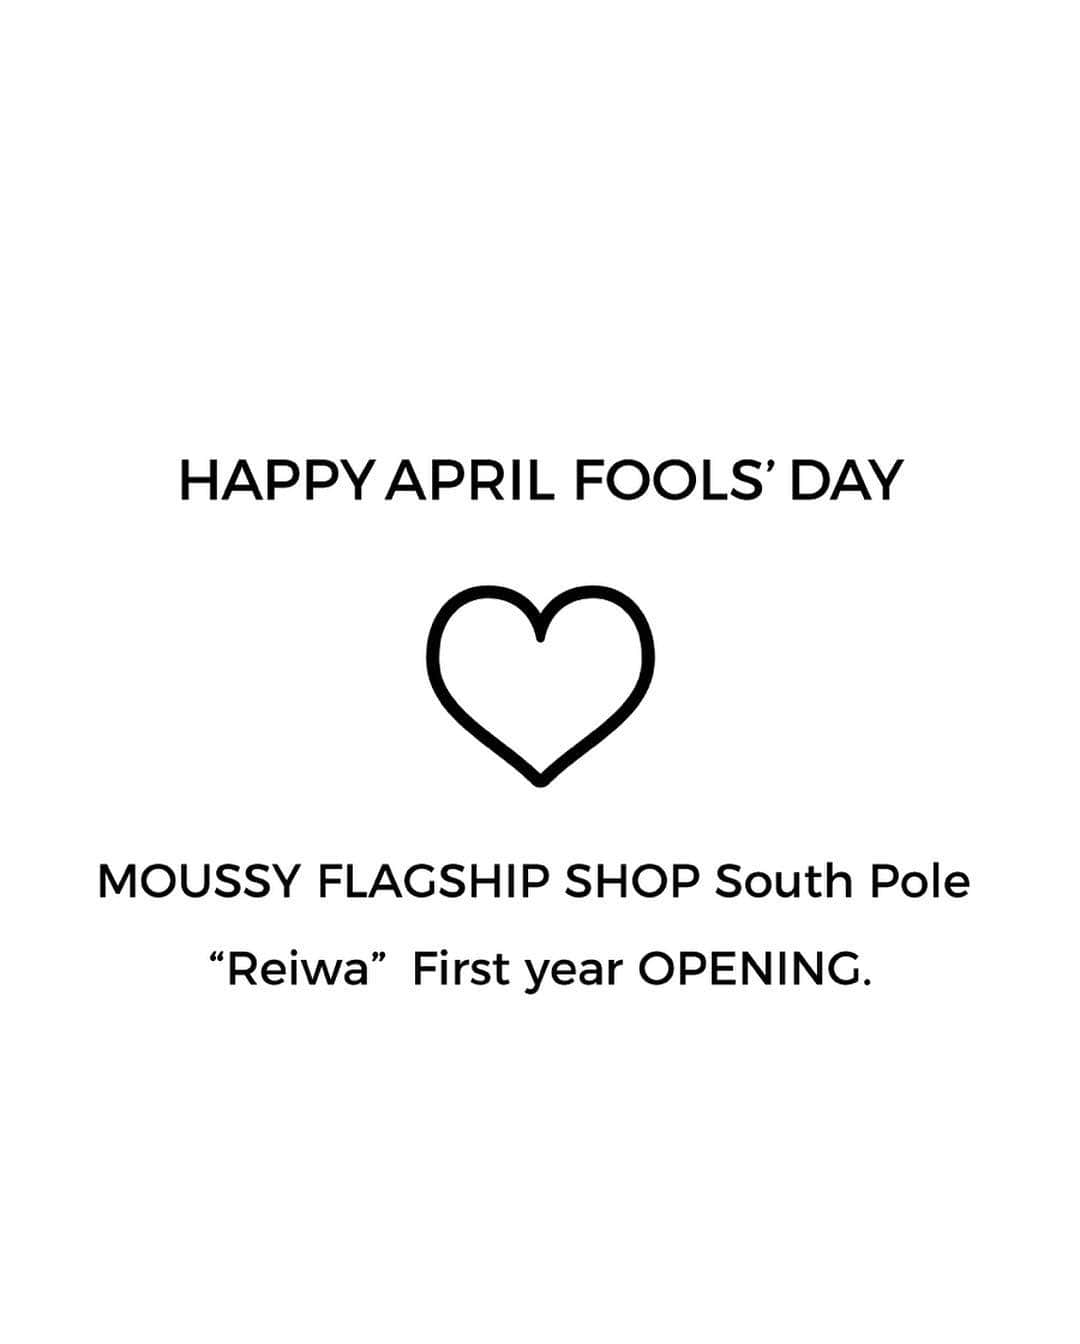 マウジーさんのインスタグラム写真 - (マウジーInstagram)「NEW OPENING🇦🇶 “Reiwa” First year✨ ㅤㅤㅤㅤㅤㅤㅤㅤㅤㅤㅤㅤㅤ MOUSSY FLAGSHIP SHOP South Pole🐧 ㅤㅤㅤㅤㅤㅤㅤㅤㅤㅤㅤㅤㅤ 新元号『令和』の発表を祝してMOUSSYの新たな旗艦店、MOUSSY南極店のグランドオープンが決定いたしました。 さらに、オープンを記念して南極店限定ジーンズを発売。 ㅤㅤㅤㅤㅤㅤㅤㅤㅤㅤㅤㅤㅤ ■MVS ATTAKA~I JEANS(あったか〜いジーンズ) 極寒の南極大陸でも快適に過ごせる機能素材を採用。 開発に約1年をかけ、蒸れにくく、保温性も備わったMOUSSYならではのジーンズが完成いたしました。 柔らかい履き心地、南極を感じさせない保温機能。 他にはないこの特別な1本を、ぜひご体感ください。 ㅤㅤㅤㅤㅤㅤㅤㅤㅤㅤㅤㅤㅤ ※MVS ATTAKA~I JEANSは南極店限定商品となります。 ※保温機能はサーモグラフィー装置で検証済み。(画像5枚目) ※グランドオープン当日は混雑が予想され、お並びいただく場合がございます。 ご来店の際は暖かい服装をお勧めいたします。 -------------------------------------------------------------- As celebrating a new era, a brand new store at South Pole will be opening! A limited jeans will be available exclusively at South Pole store. ㅤㅤㅤㅤㅤㅤㅤㅤㅤㅤㅤㅤㅤ ■MVS ATTAKA~I JEANS(あったか〜いジーンズ) A limited jeans features functional fabric which keep you extremely warm even at harsh conditions on South Pole. It took a whole year to develop this functionality and never be able to be found anywhere else. ㅤㅤㅤㅤㅤㅤㅤㅤㅤㅤㅤㅤㅤ ※This jeans will exclusively be sold at South Pole Store. ※Thermography shows how warm it would be. ※A long line will be expected on the opening day, you better wear warm. -------------------------------------------------------------- MOUSSY 2019 April fools’ day. #MOUSSY #MOUSSYJEANS #令和元年 #REIWA #エイプリルフール #aprilfool #aprilfools」4月1日 18時01分 - moussyofficial